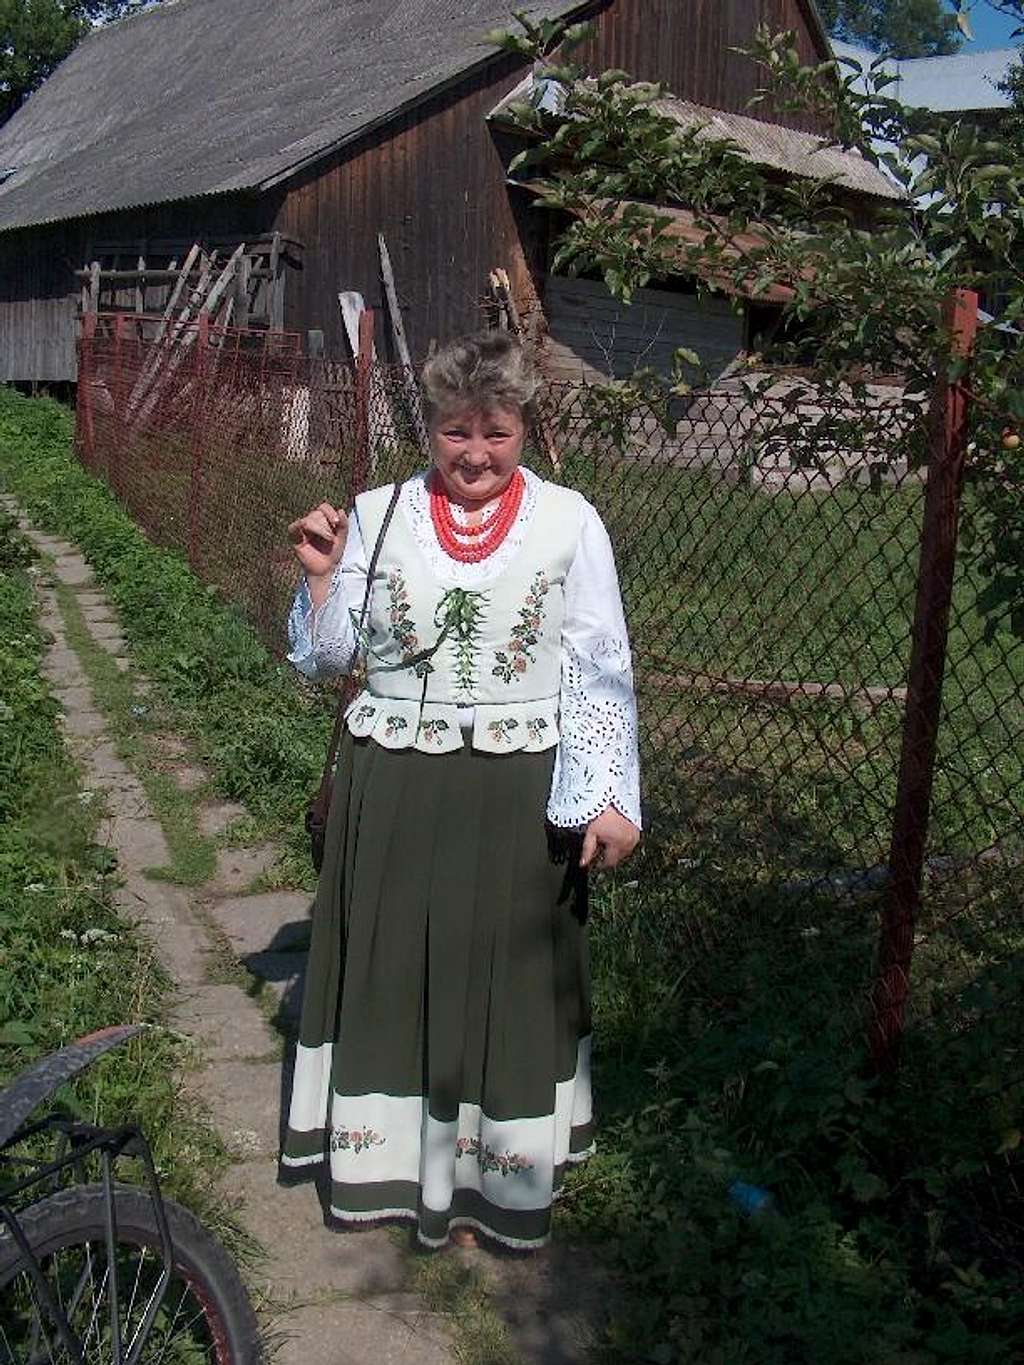 Folkloric costumes of the region of Gorce